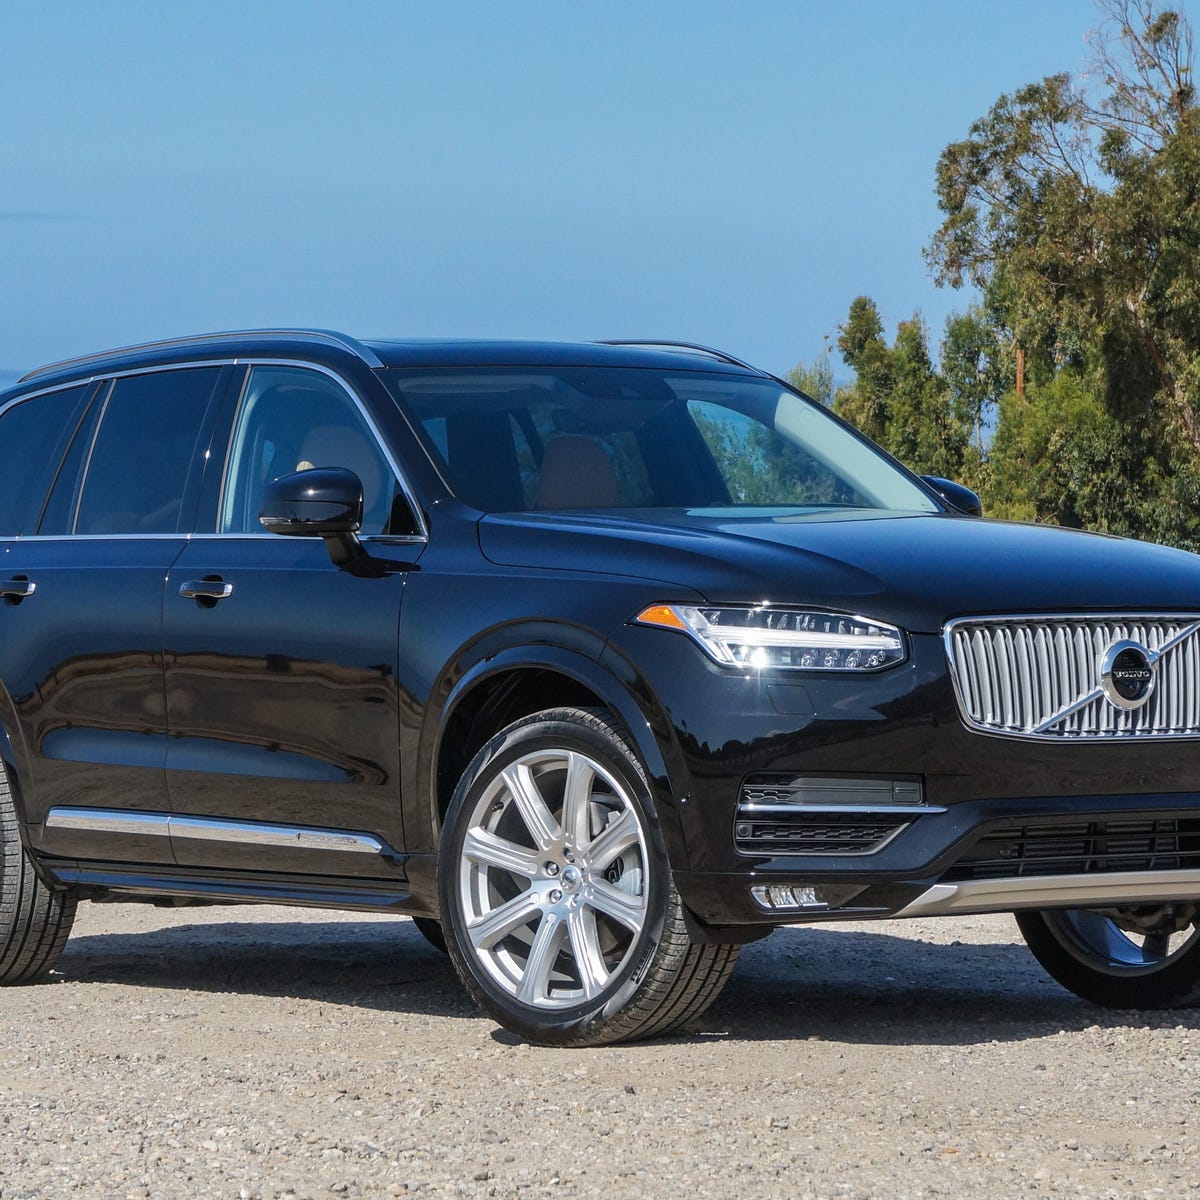 Forsøg jordnødder Ledig 2016 Volvo XC90 T6 and T8 Inscription review: With the all-new XC90, Volvo  vies for luxury legitimacy - CNET